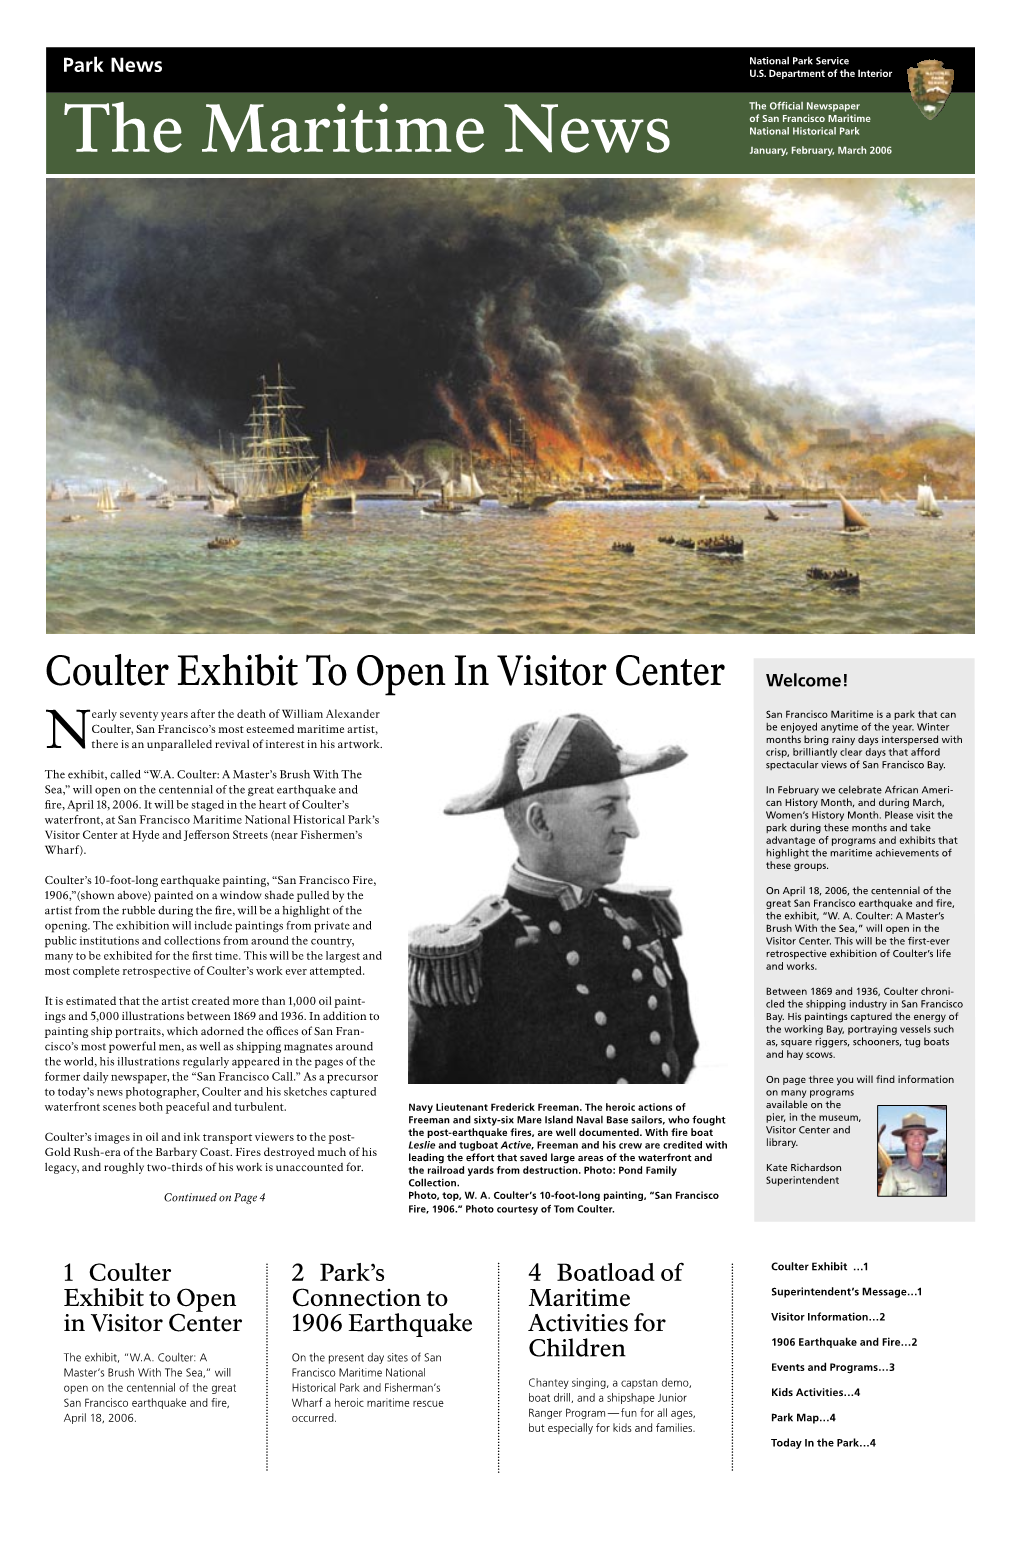 Coulter Exhibit to Open in Visitor Center Welcome!